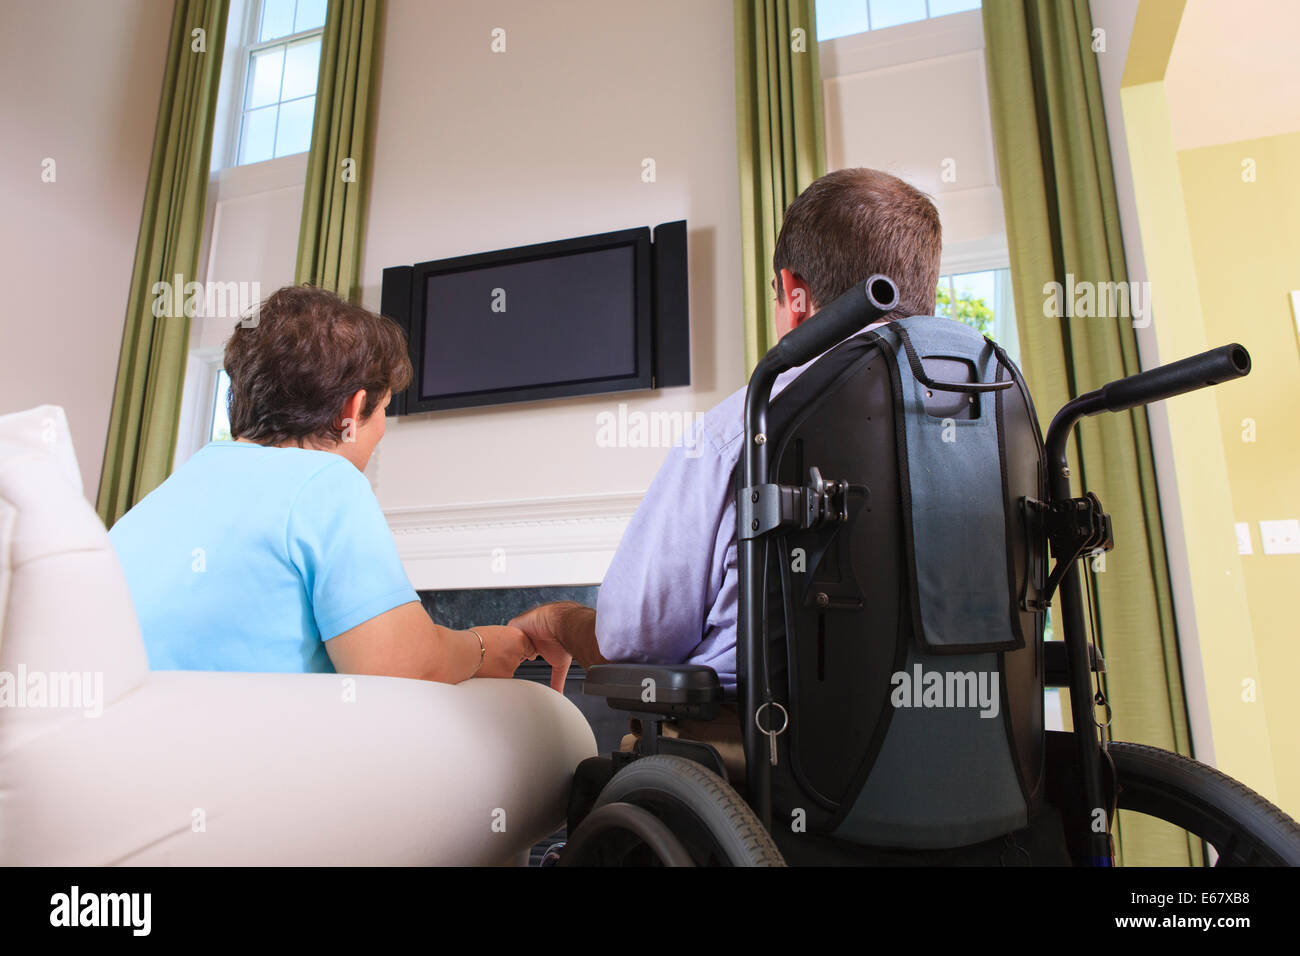 Couple with Cerebral Palsy watching TV in their home Stock Photo